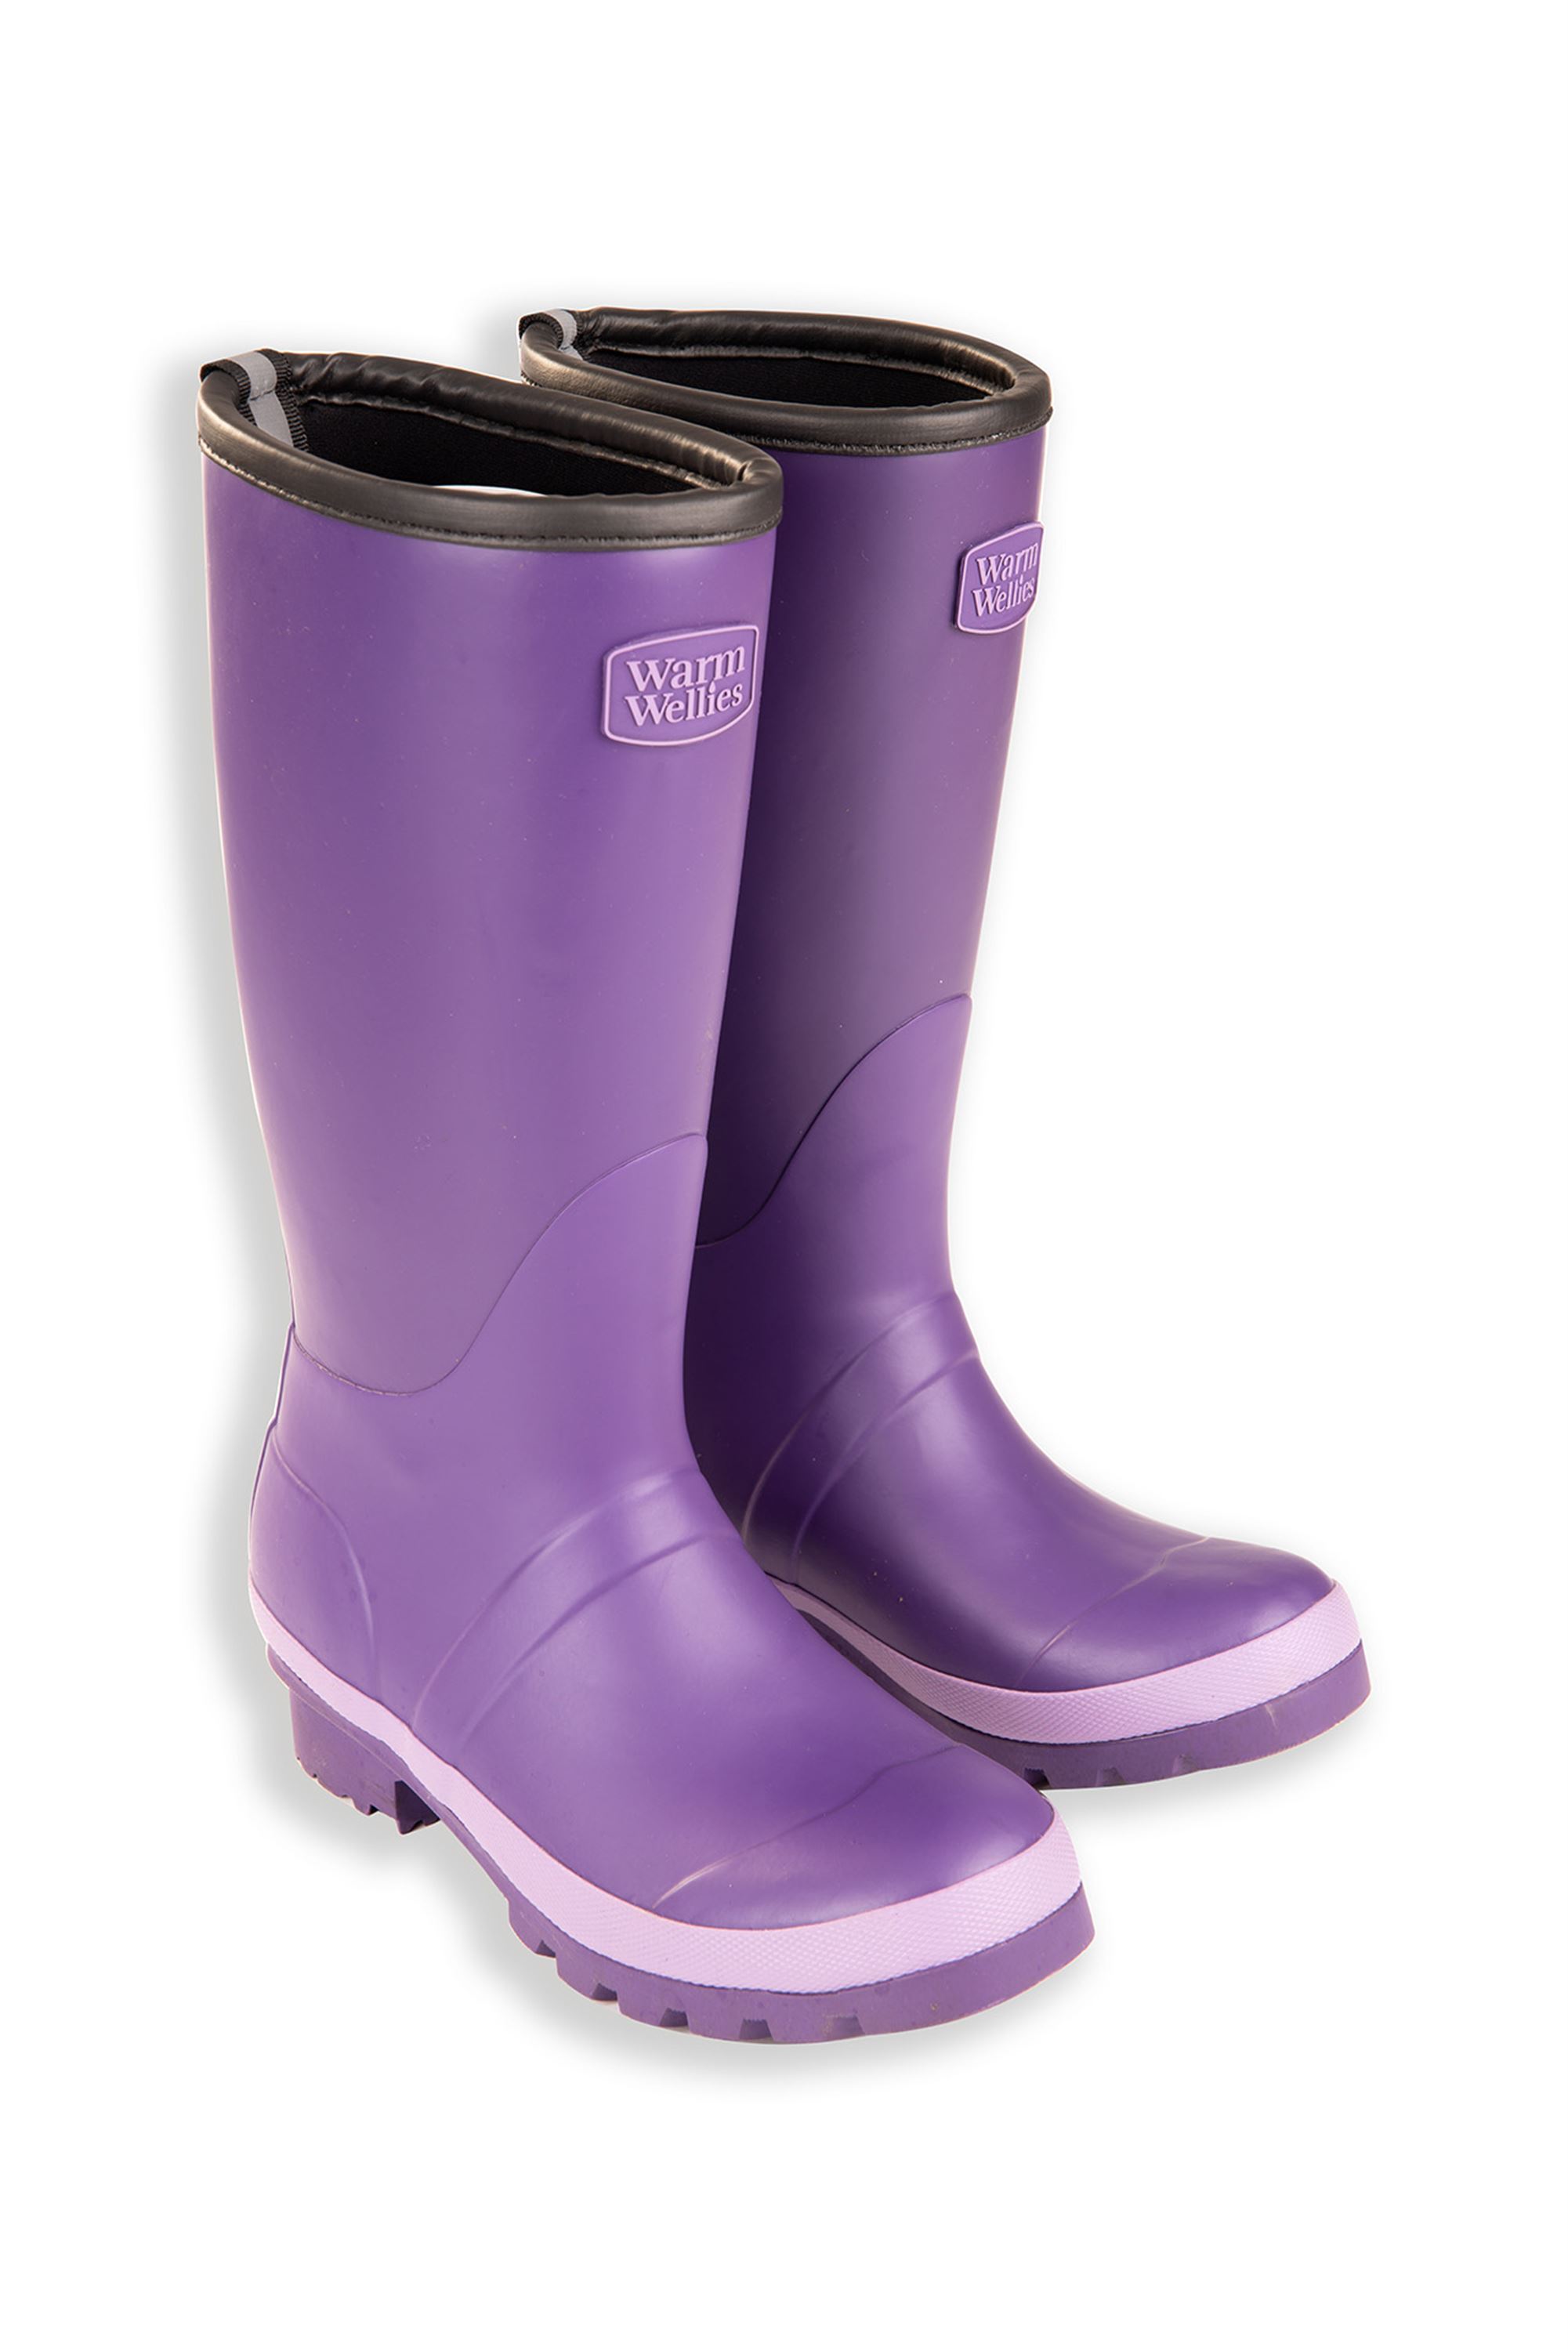 wide wellies for toddlers